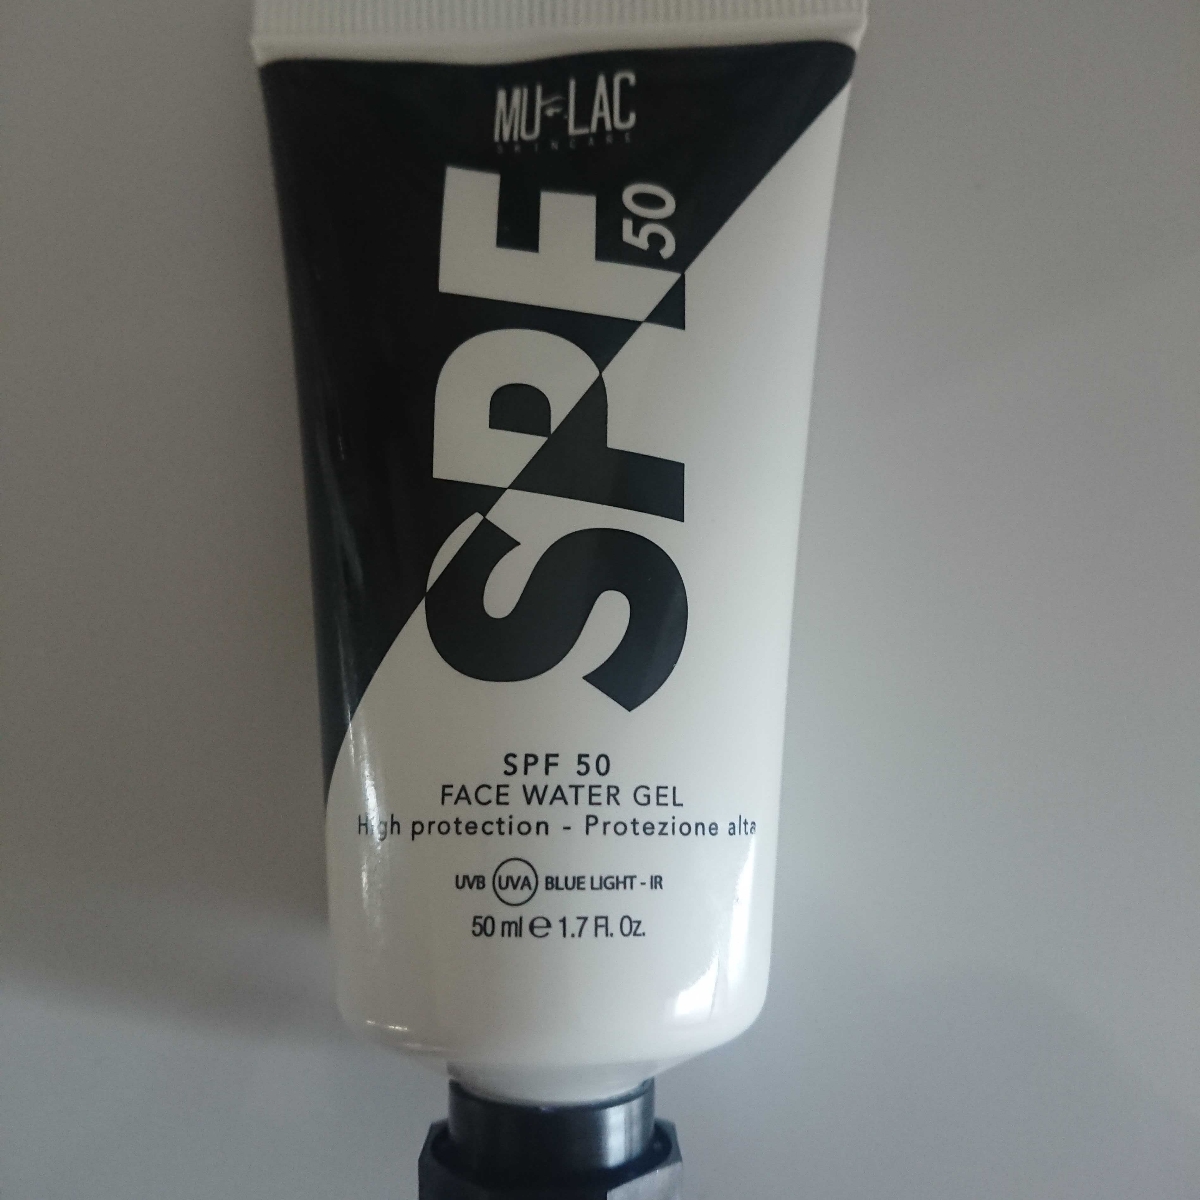 Mulac cosmetics SPF 50 Face Water Gel Reviews | abillion